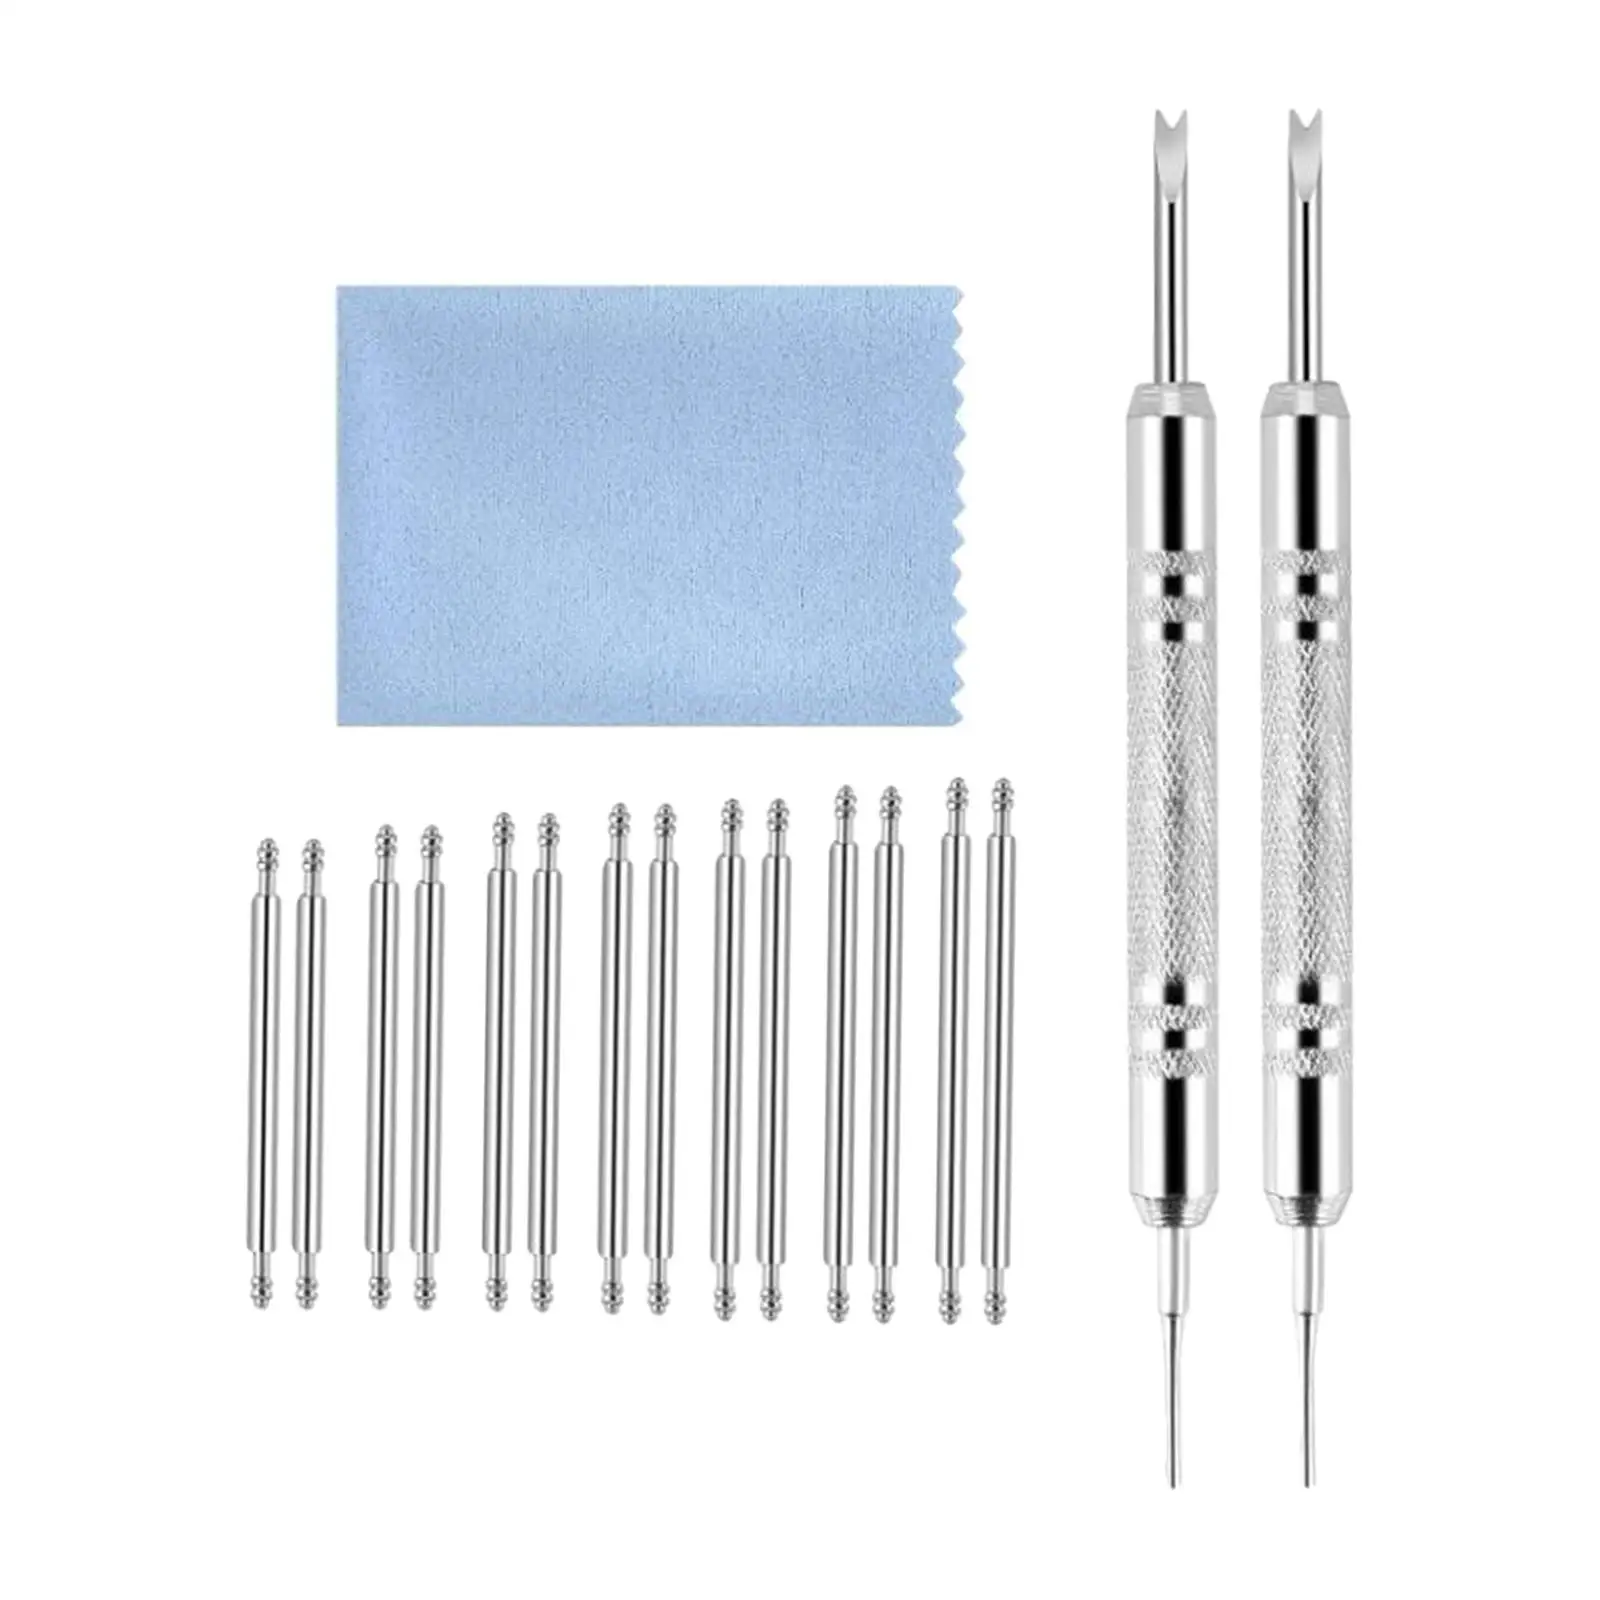 Watch Band Link Pins Remover Repair Tool 18-25mm Watch Band Repair Kit Watch Band Pins for Watch Accessories Watch Band Removal